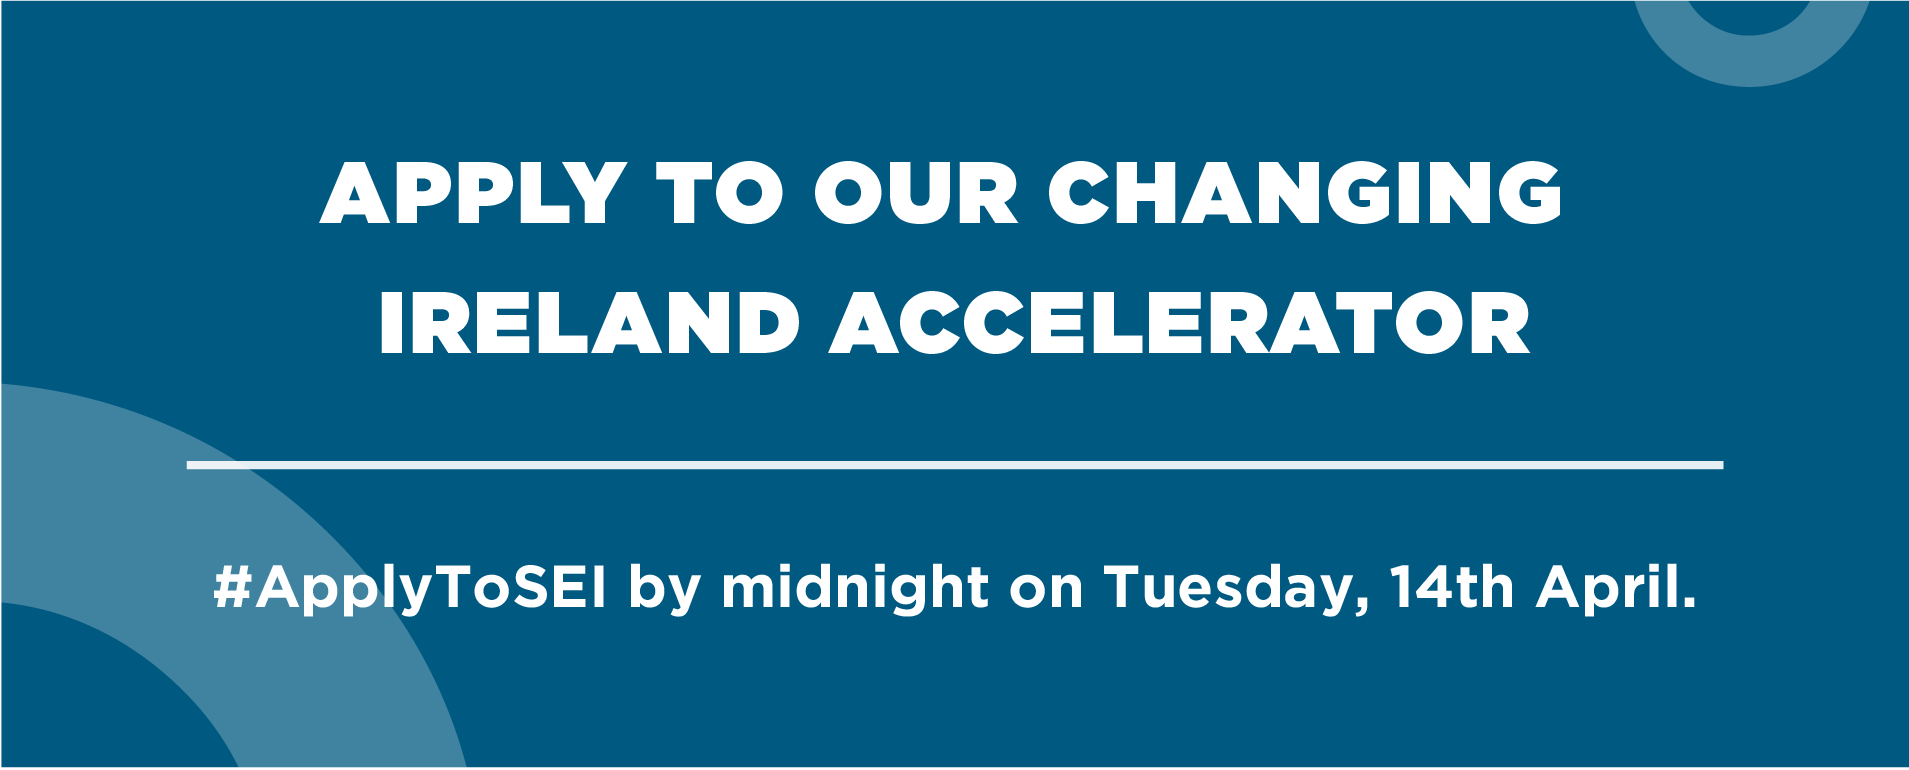 Apply to SEI Changing Ireland Accelerator